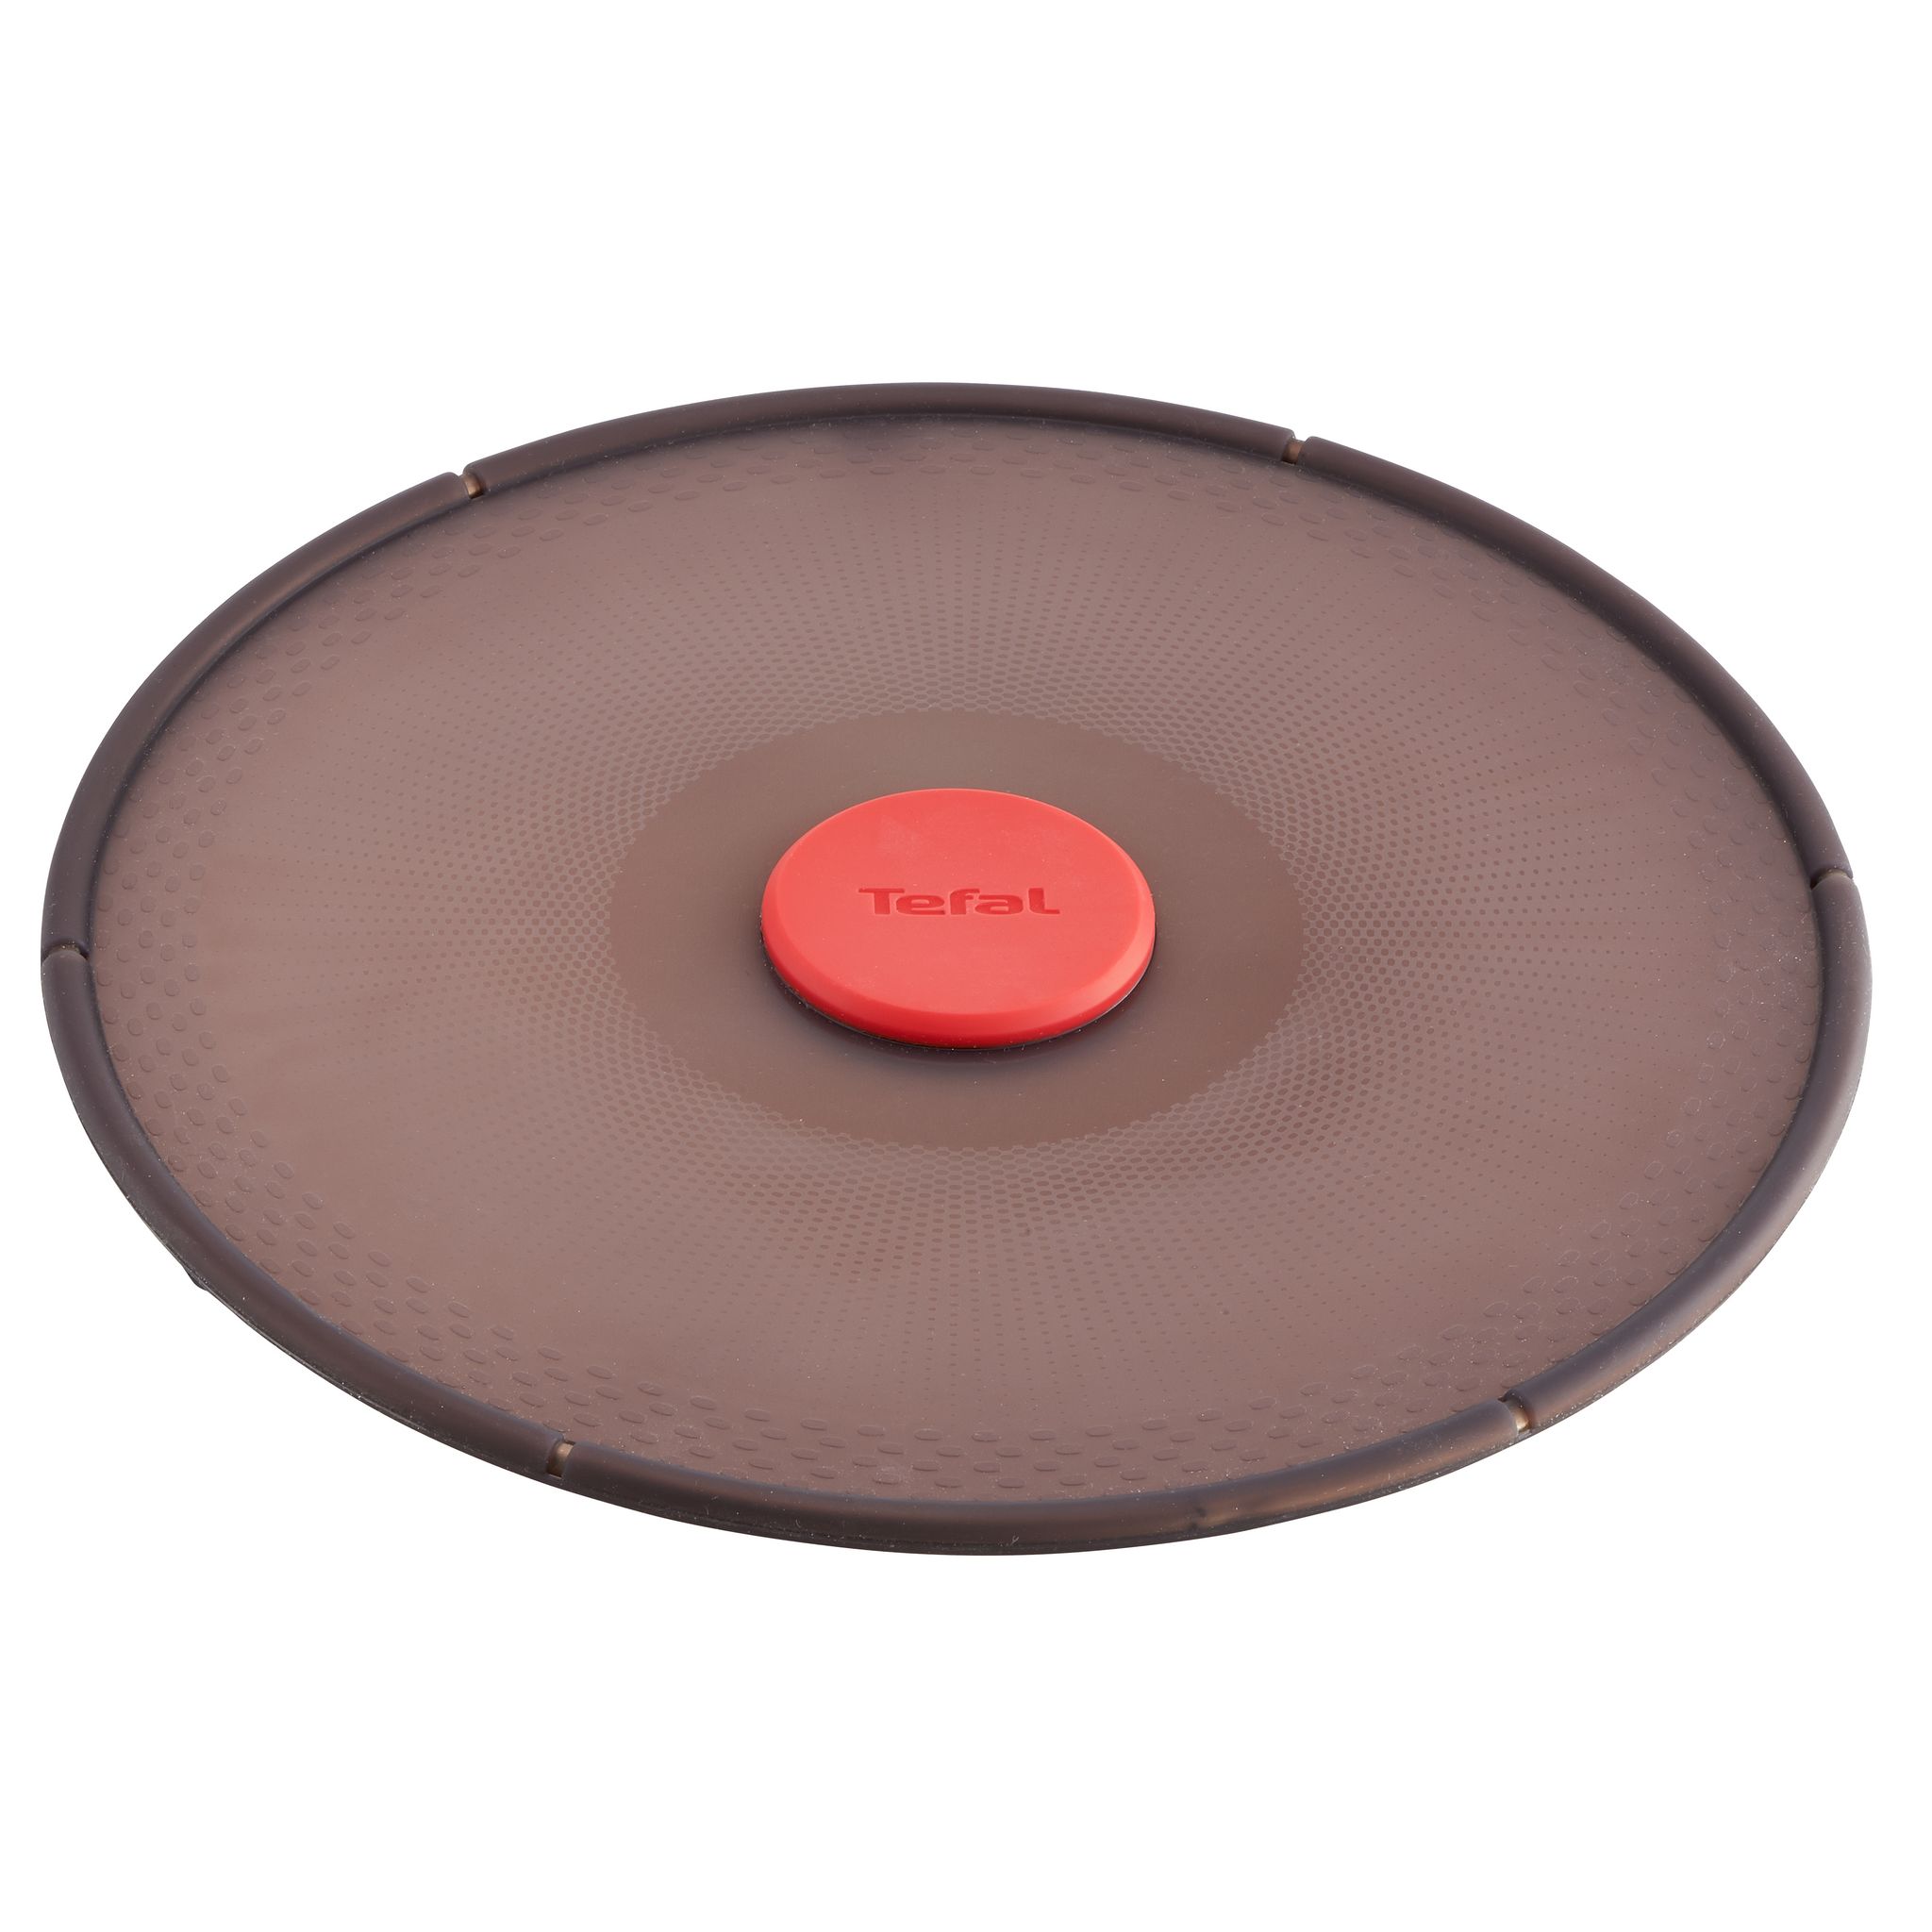 TEFAL Couvercle INGENIO Silicone 29 cm pas cher 